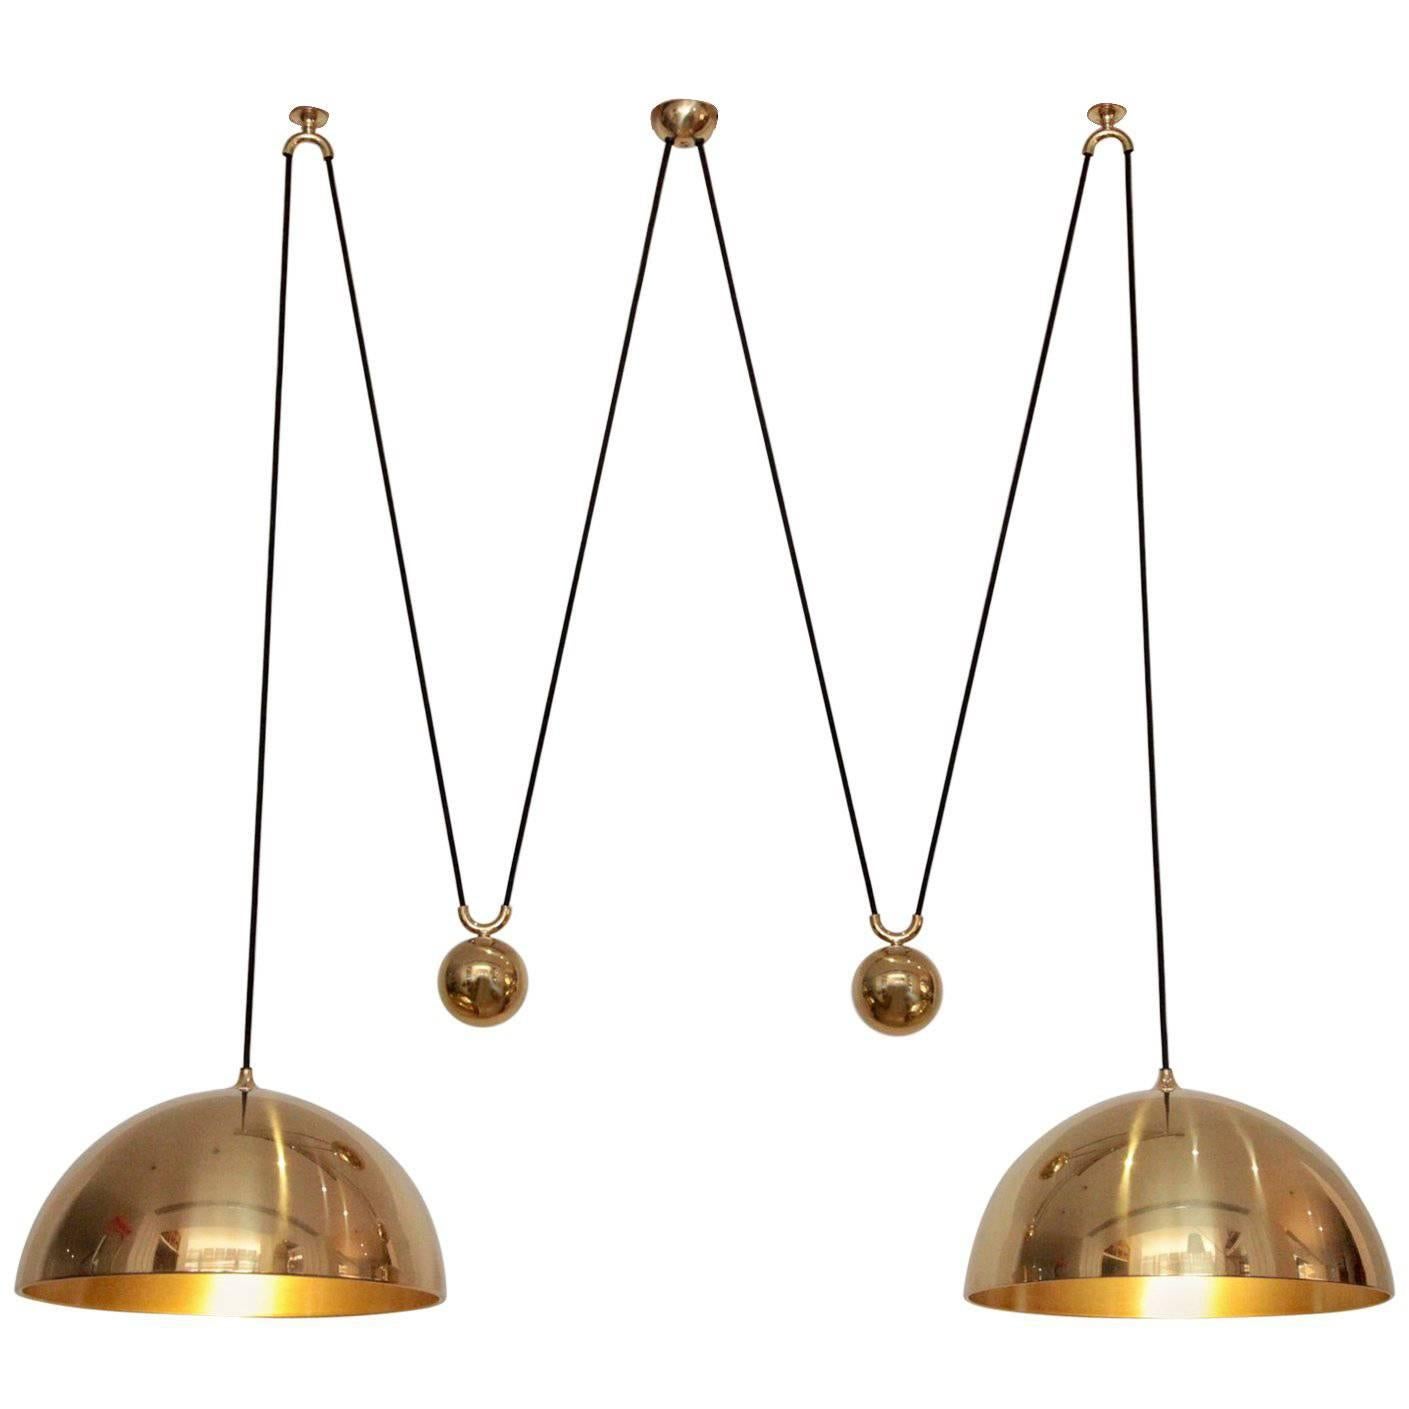 Stunning Florian Schulz Double Posa Brass Pendant Lamp with Side Counter Weights